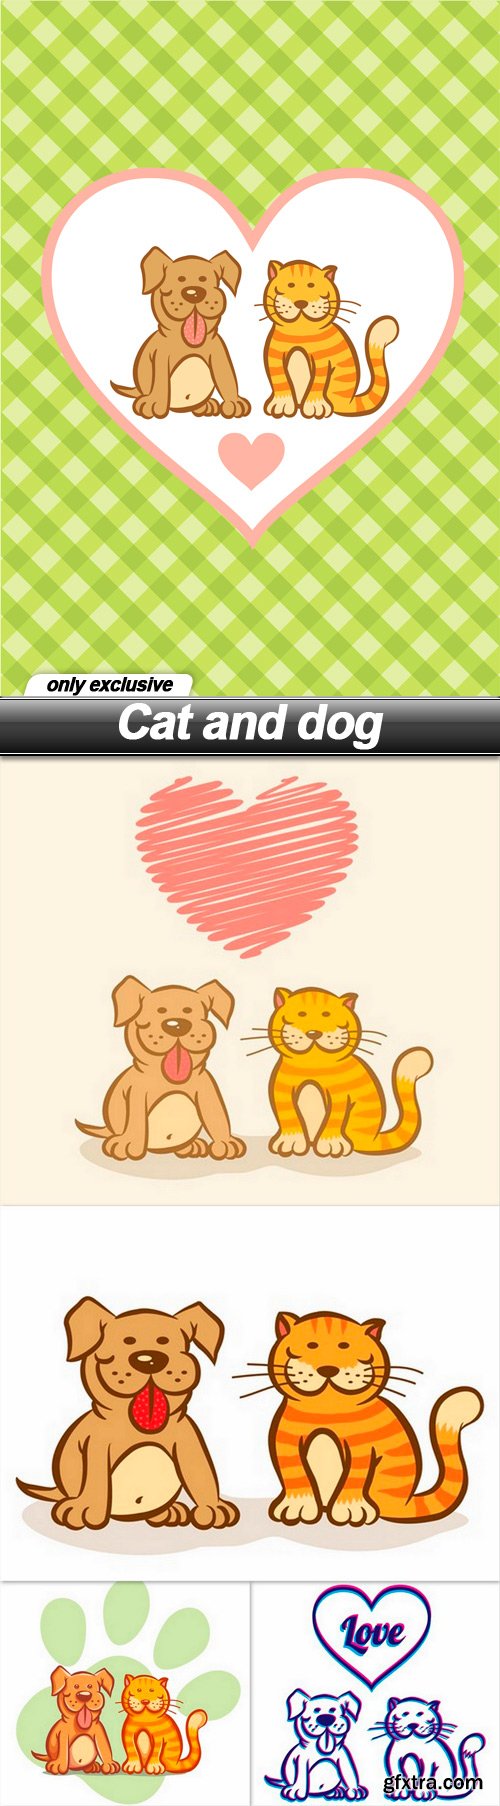 Cat and dog - 5 EPS